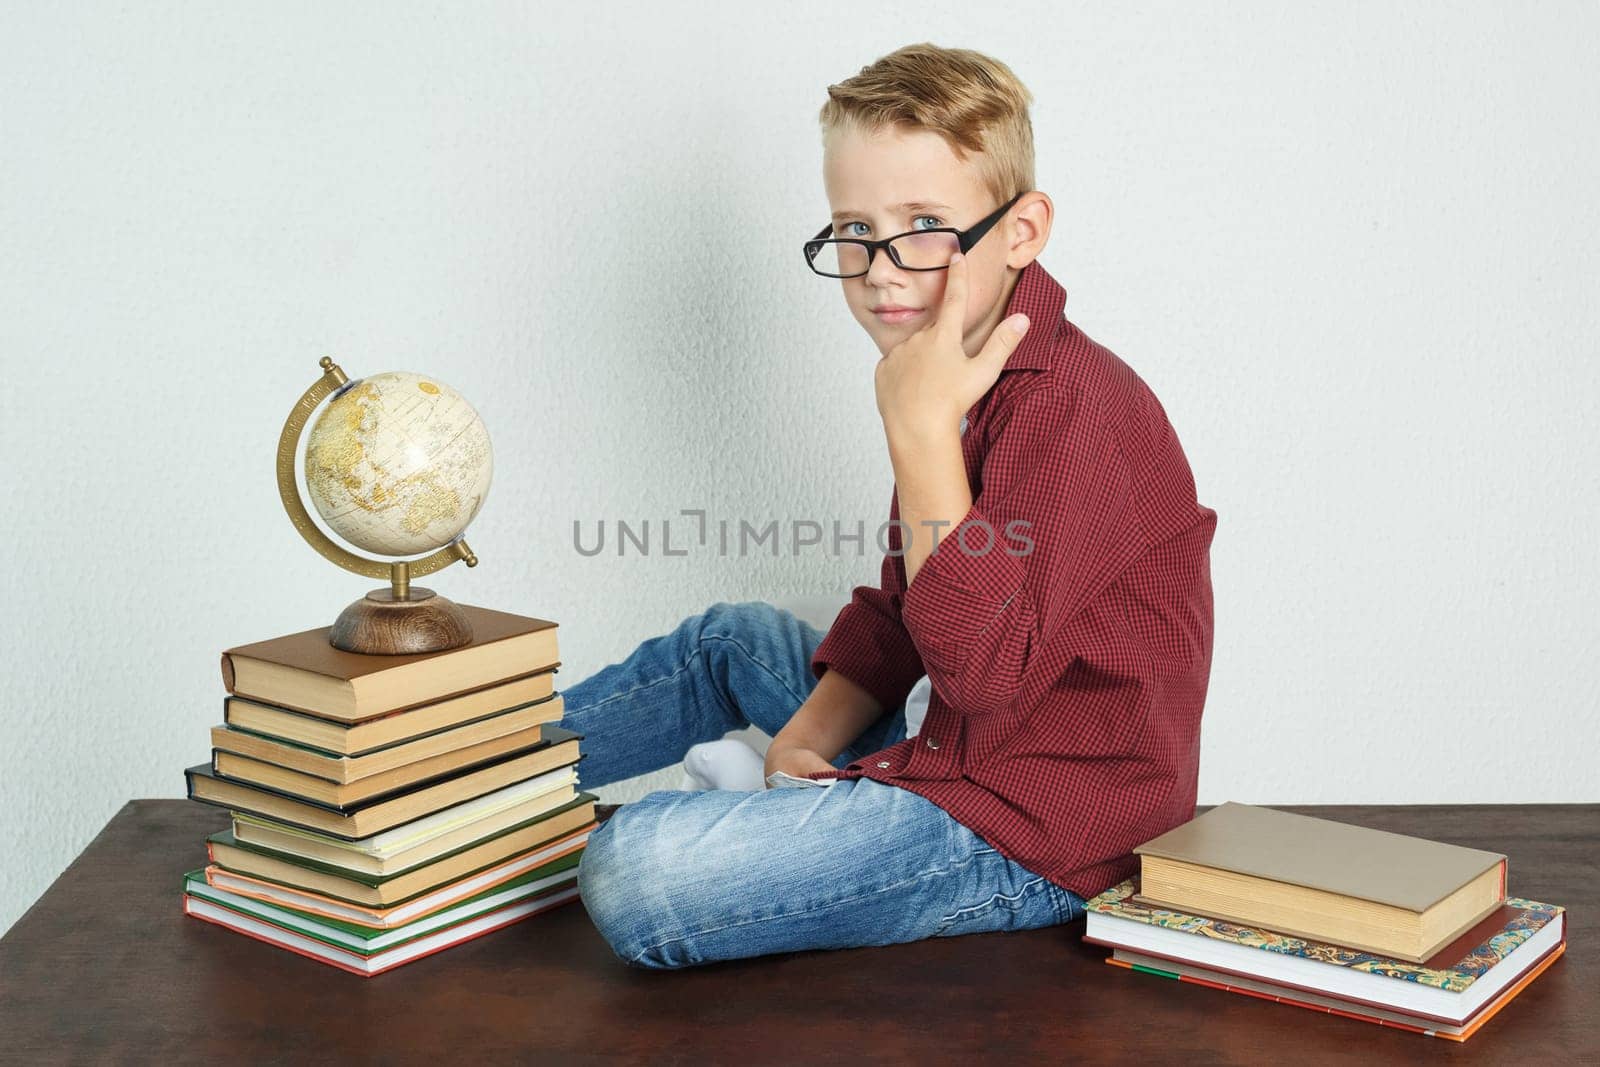 A schoolboy sits on a table near books and a globe, straightens his glasses. by Sd28DimoN_1976